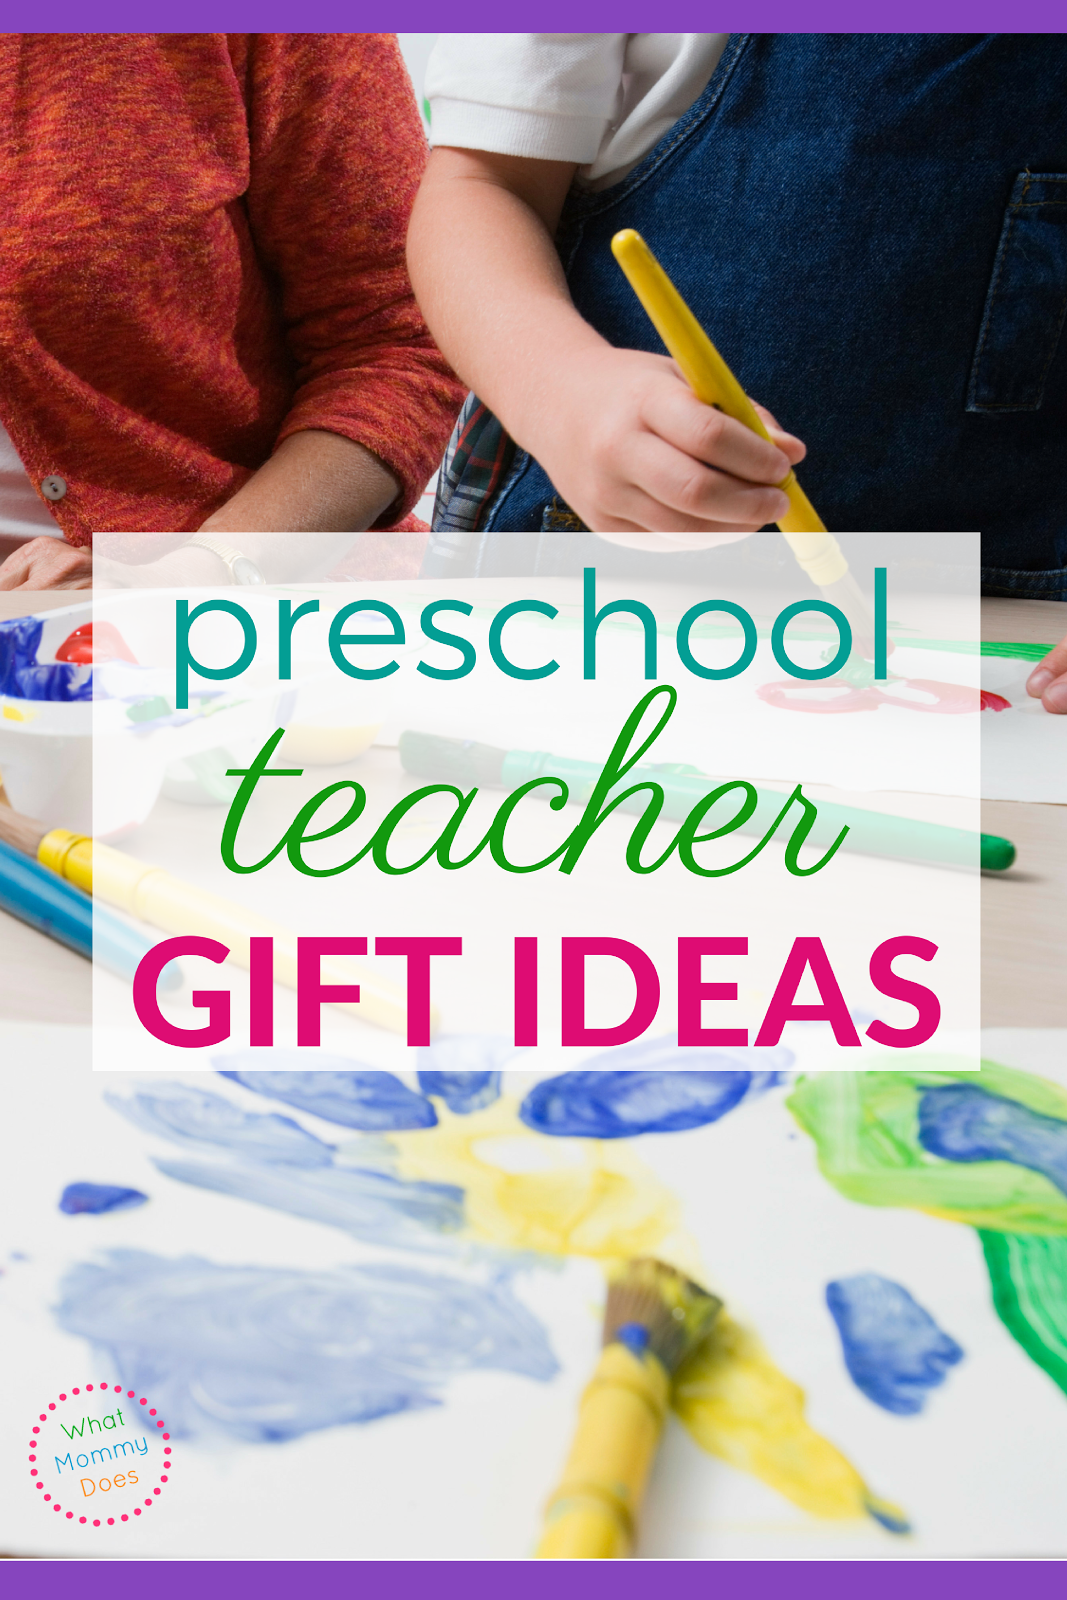 Lots of great preschool teacher gift ideas here! Some are DIY and others can be bought if you don't have the time. A gift is a great way to say THANK YOU to your child's teachers at the end of the year.